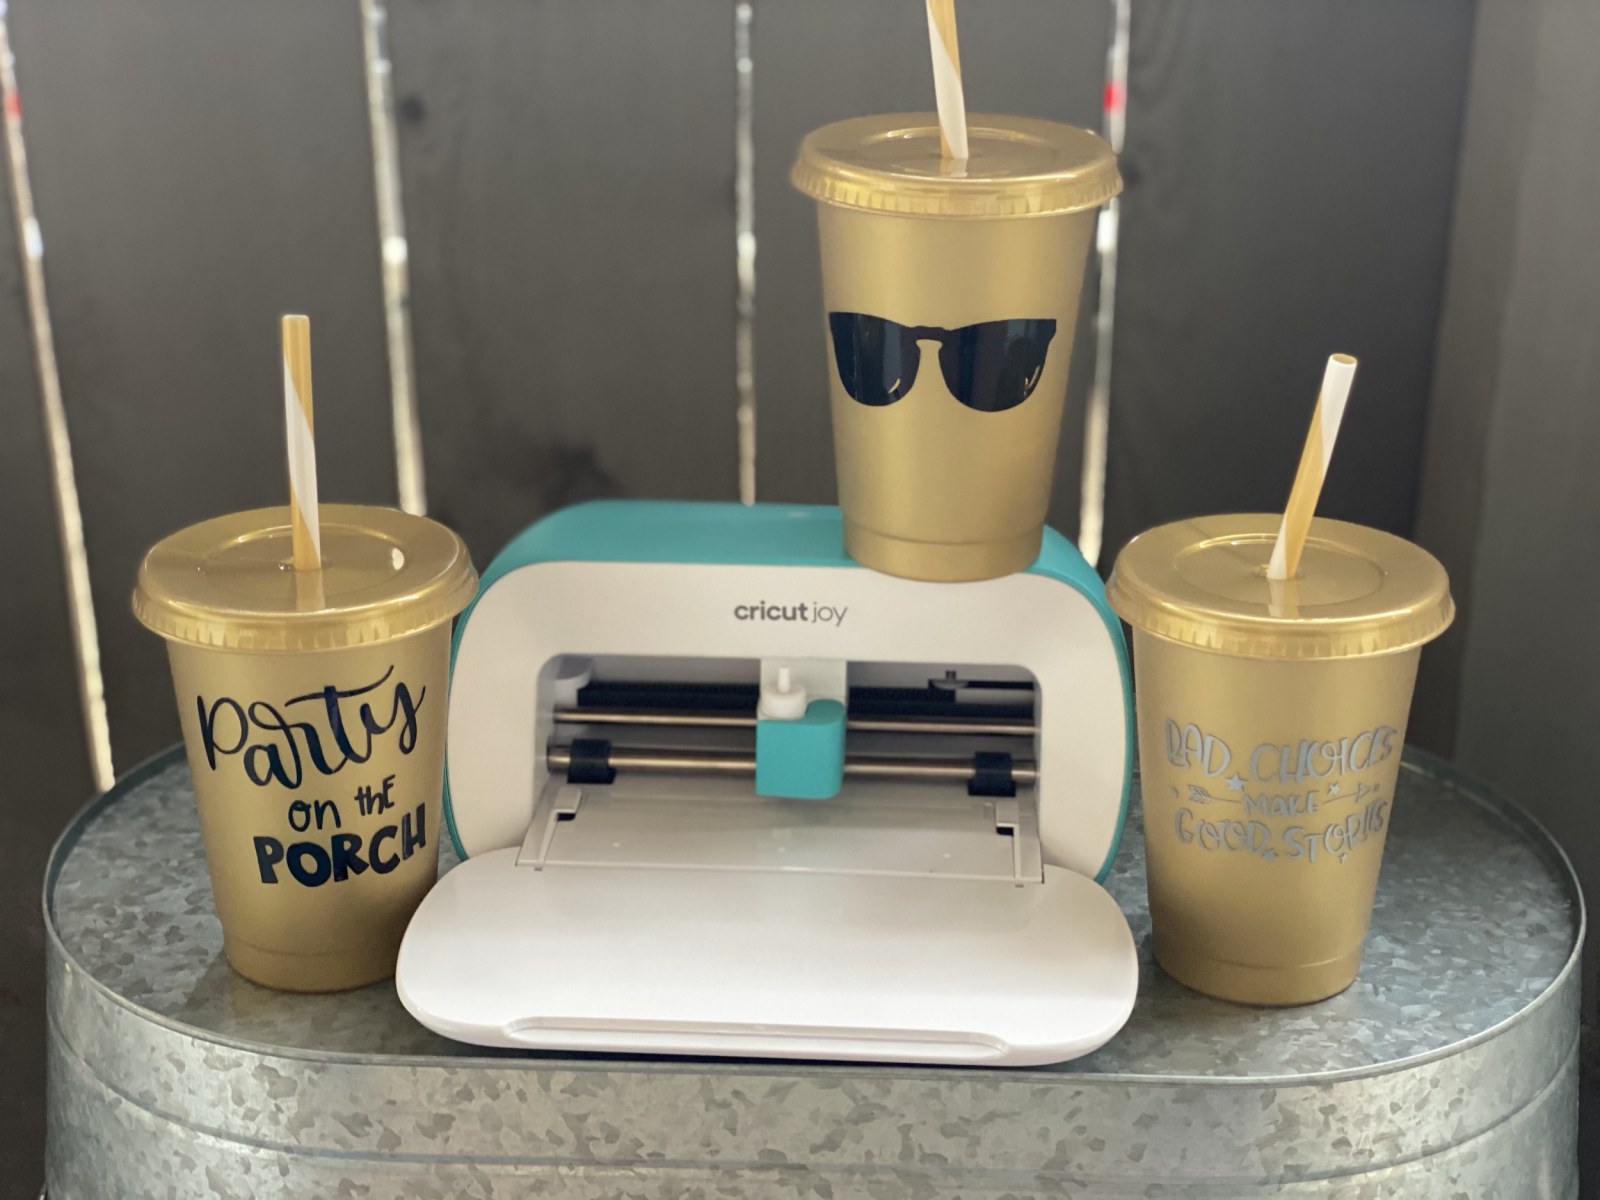 Cricut Joy Review- Everything you need to know - Weekend Craft